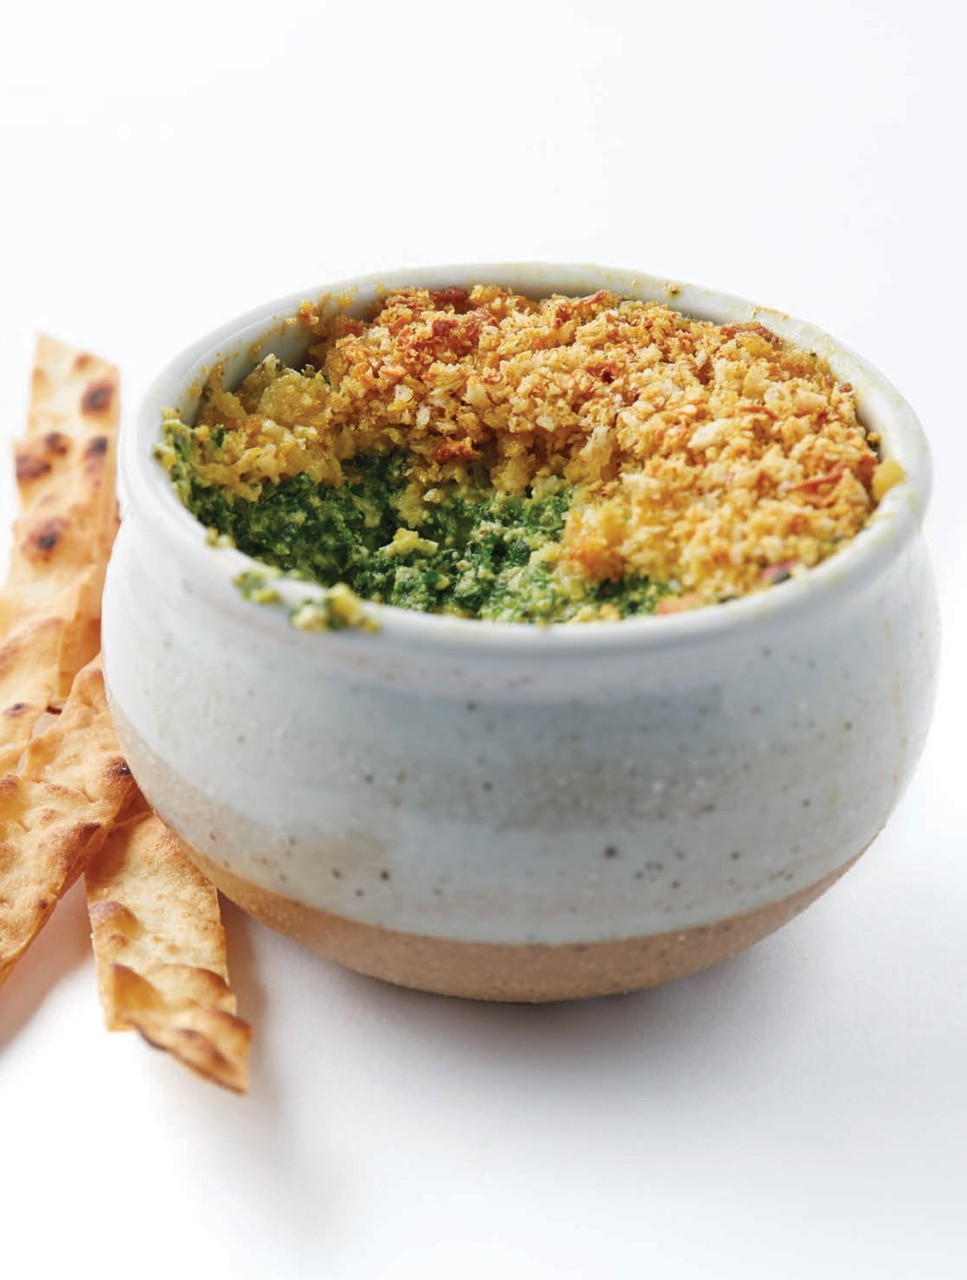 Honey Brown Lager-Spiked Warm Curried Spinach & Ricotta Dip with Crunchy Panko Topping